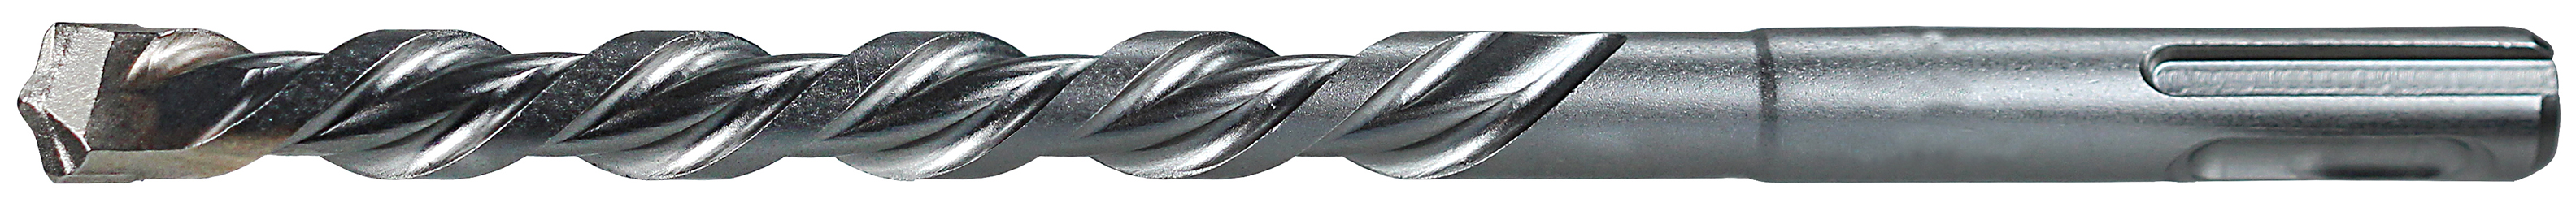 Rotary Hammer Drill Bit, 1/4 in. bit diameter, 4-1/2 in. overall length, Straight shank type, 3 flutes, Tip-Carbide material, 2 in. drilling depth